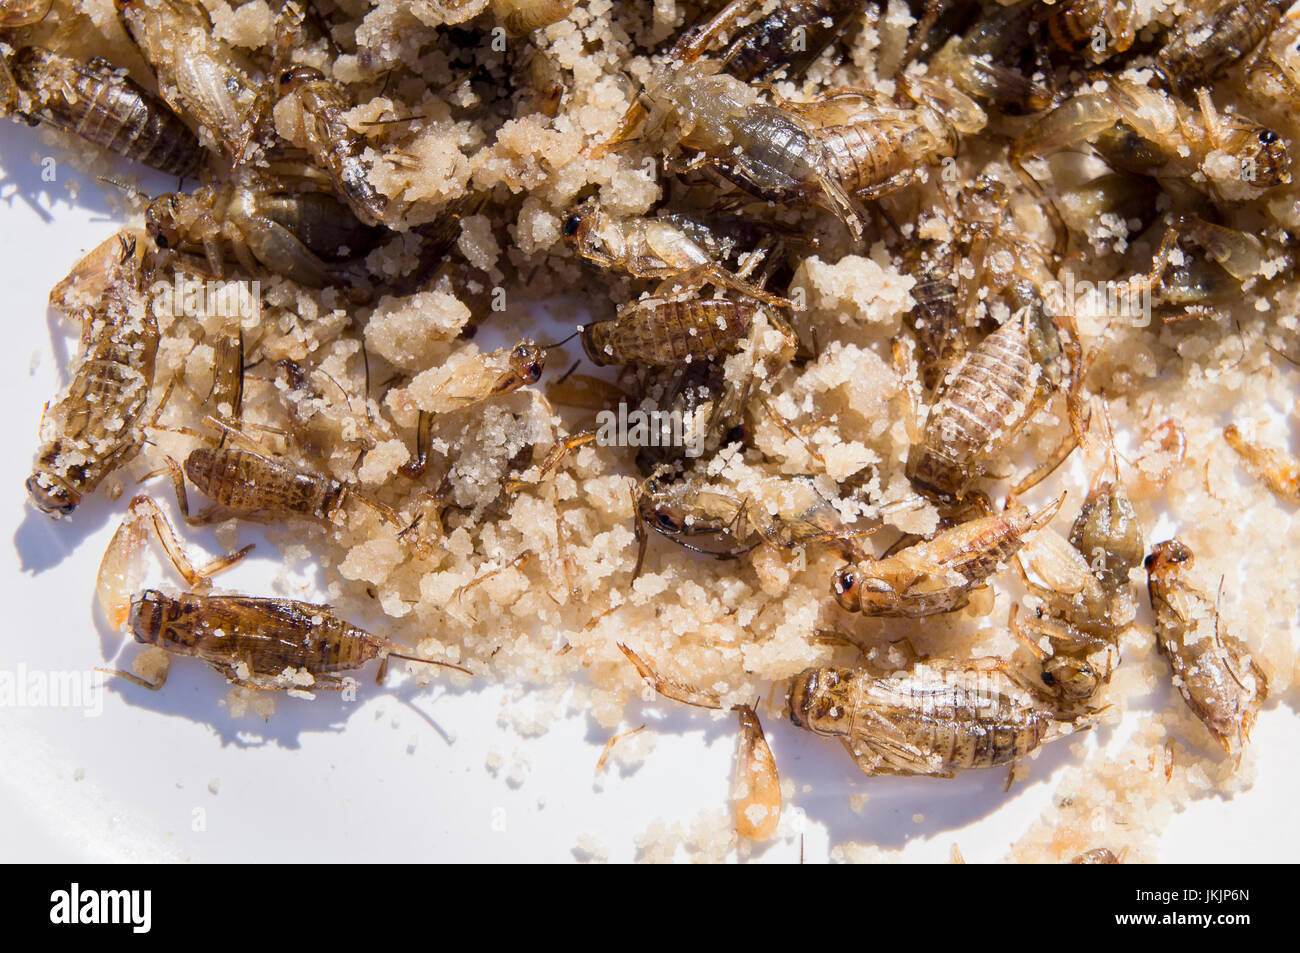 unusual insect dishes for visitors within the Insectivore Days, caramelised House Cricket, Acheta domesticus, plate, food Stock Photo